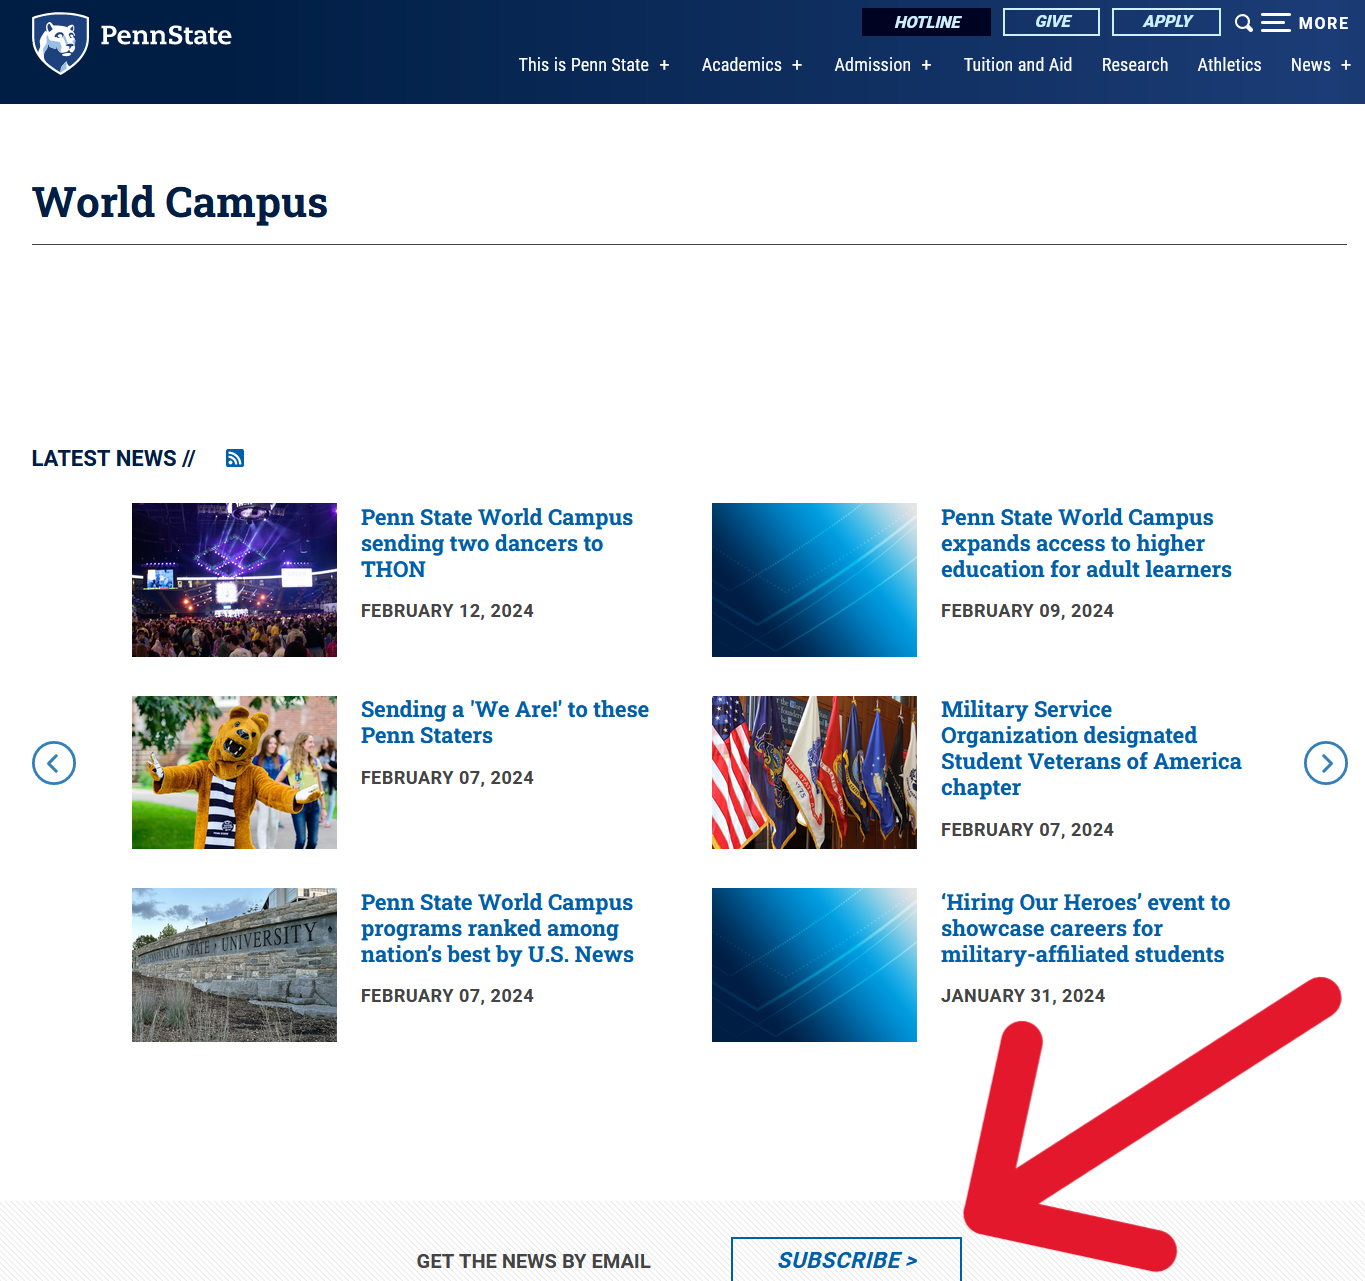 link to the Penn State Events Calendar. On this page, Subscription link in box to the right. 